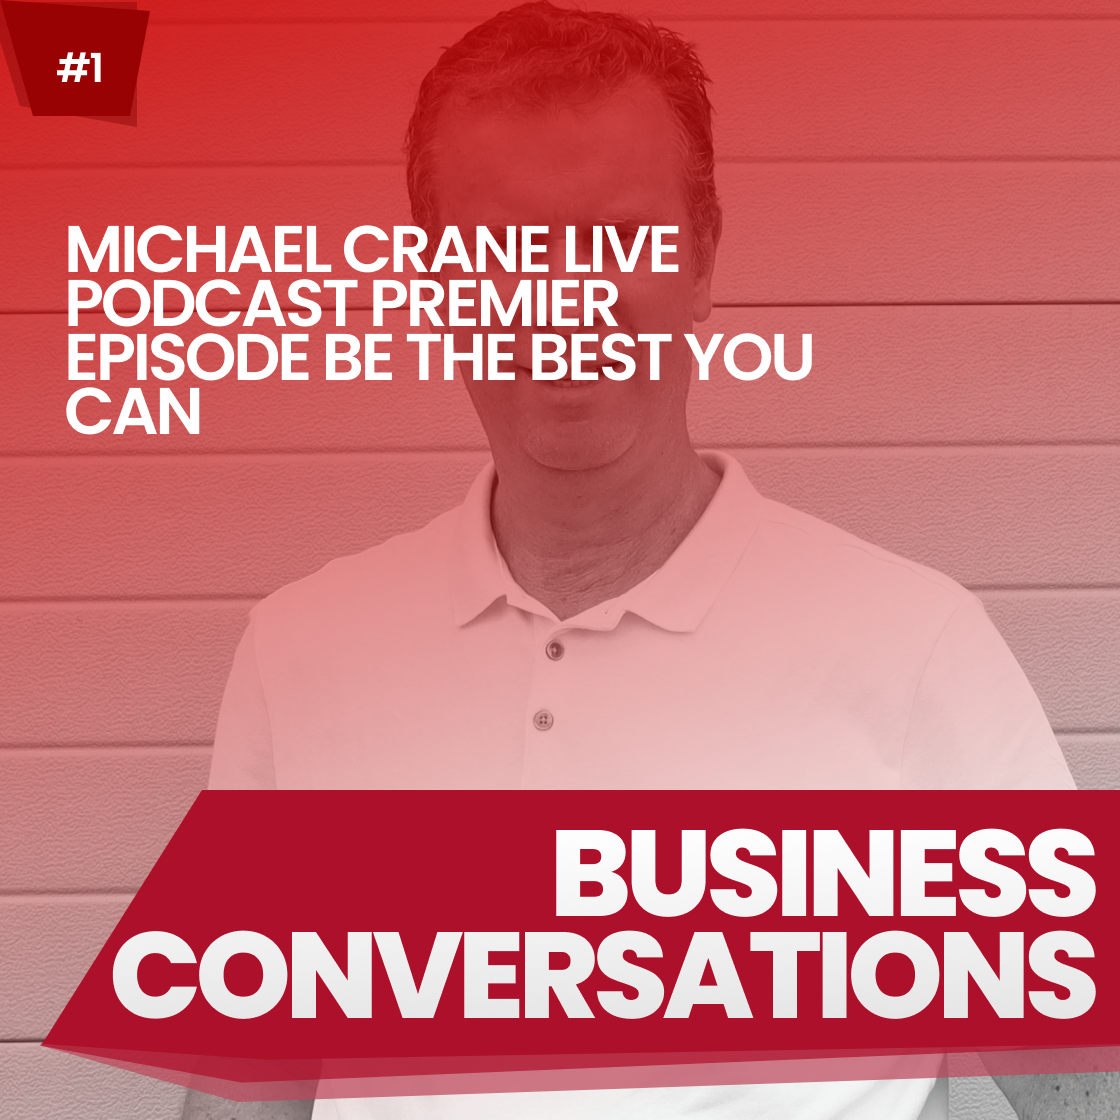 Michael Crane Live Podcast Premier Episode Be The Best You Can